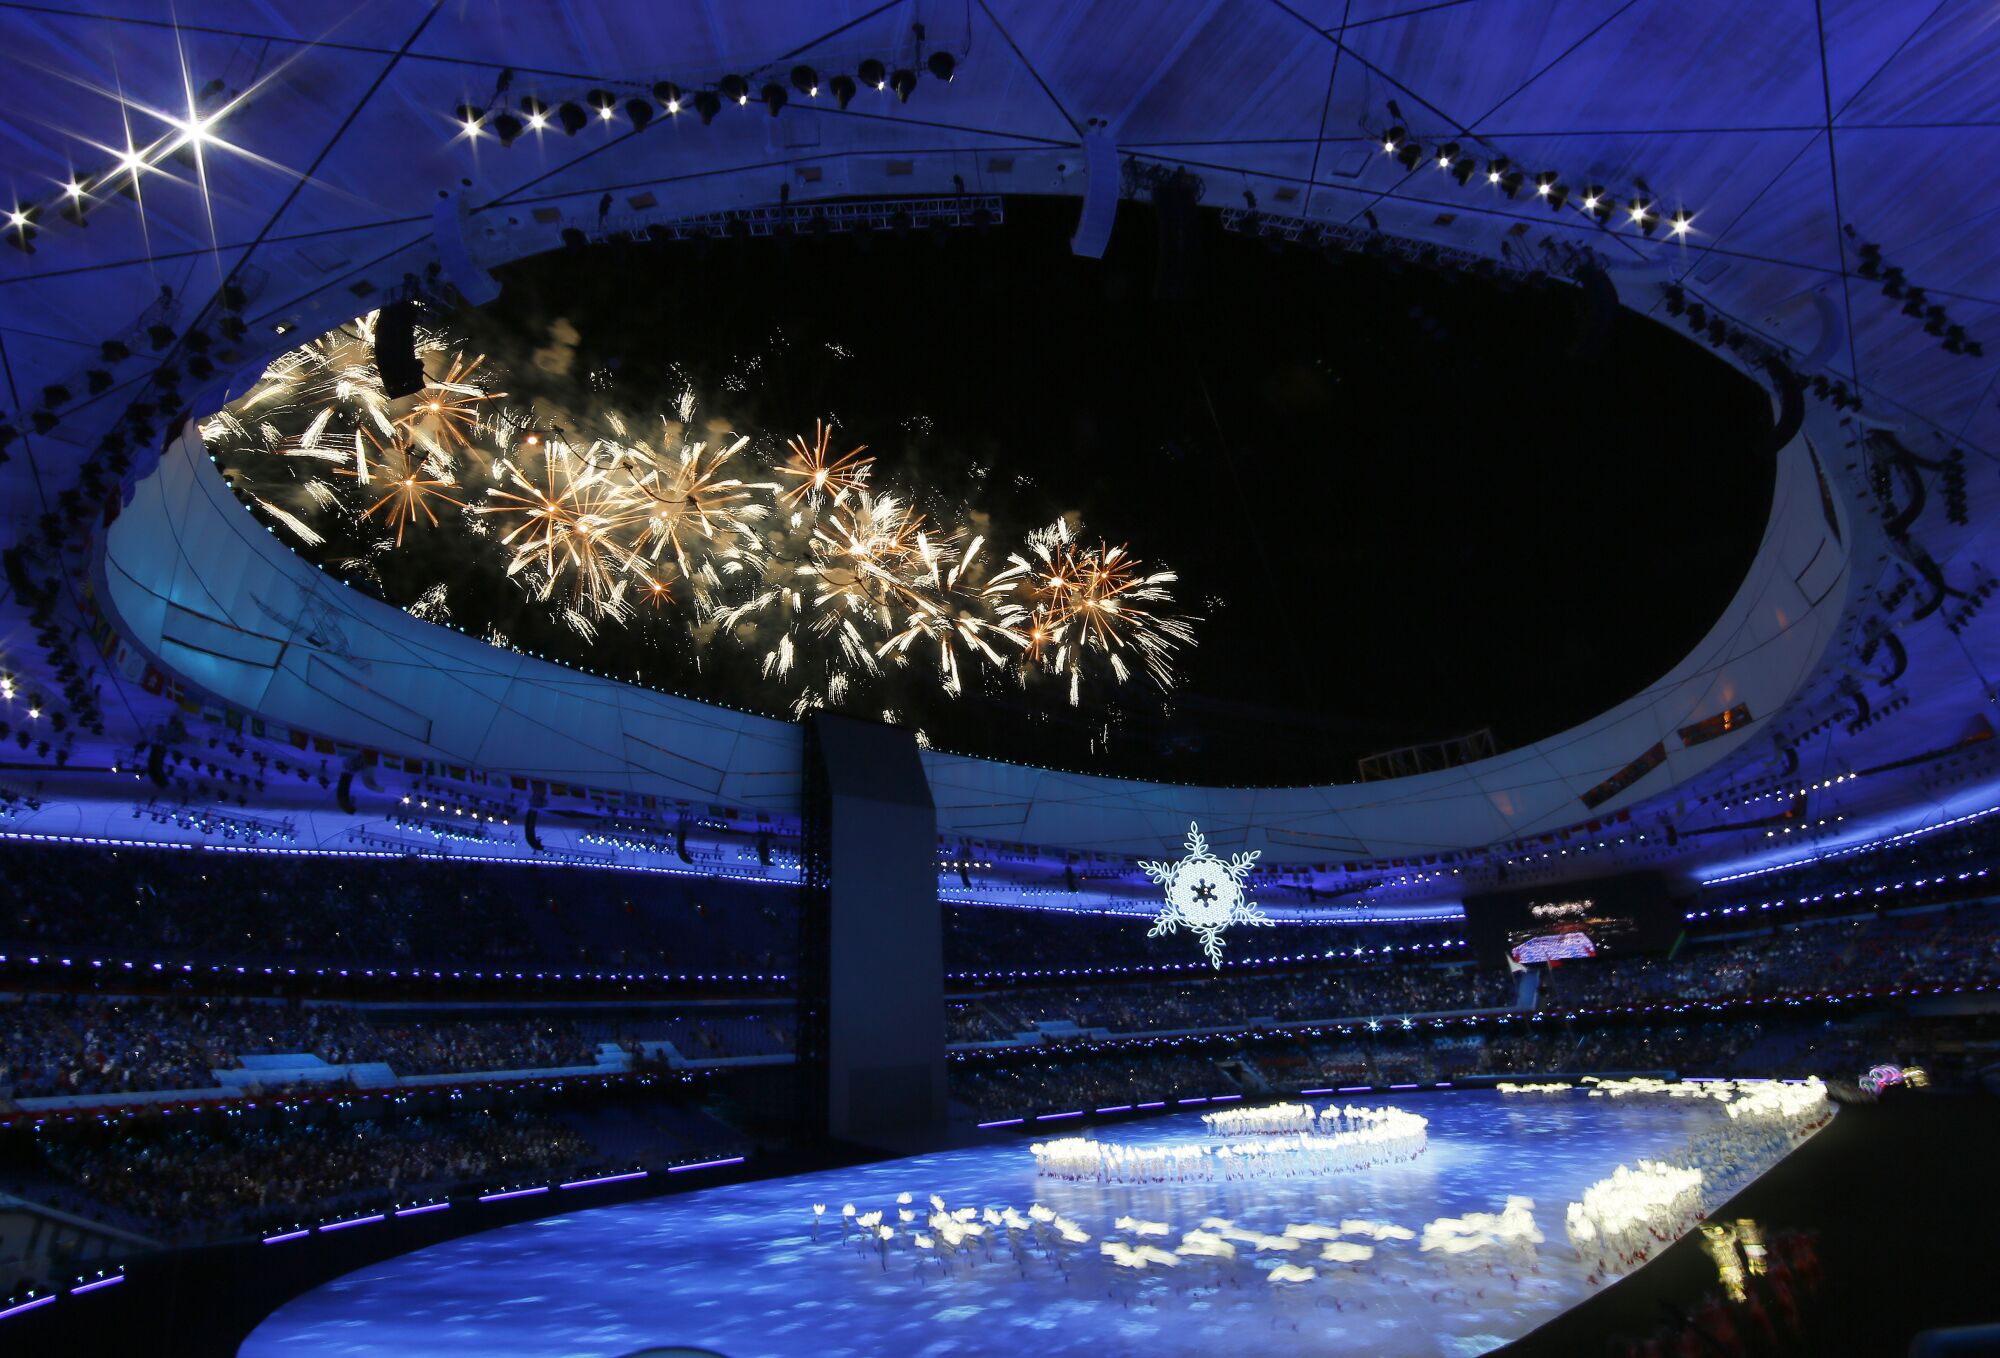 Fireworks explode over Beijing National Stadium during the 2022 Winter Olympics opening ceremony.